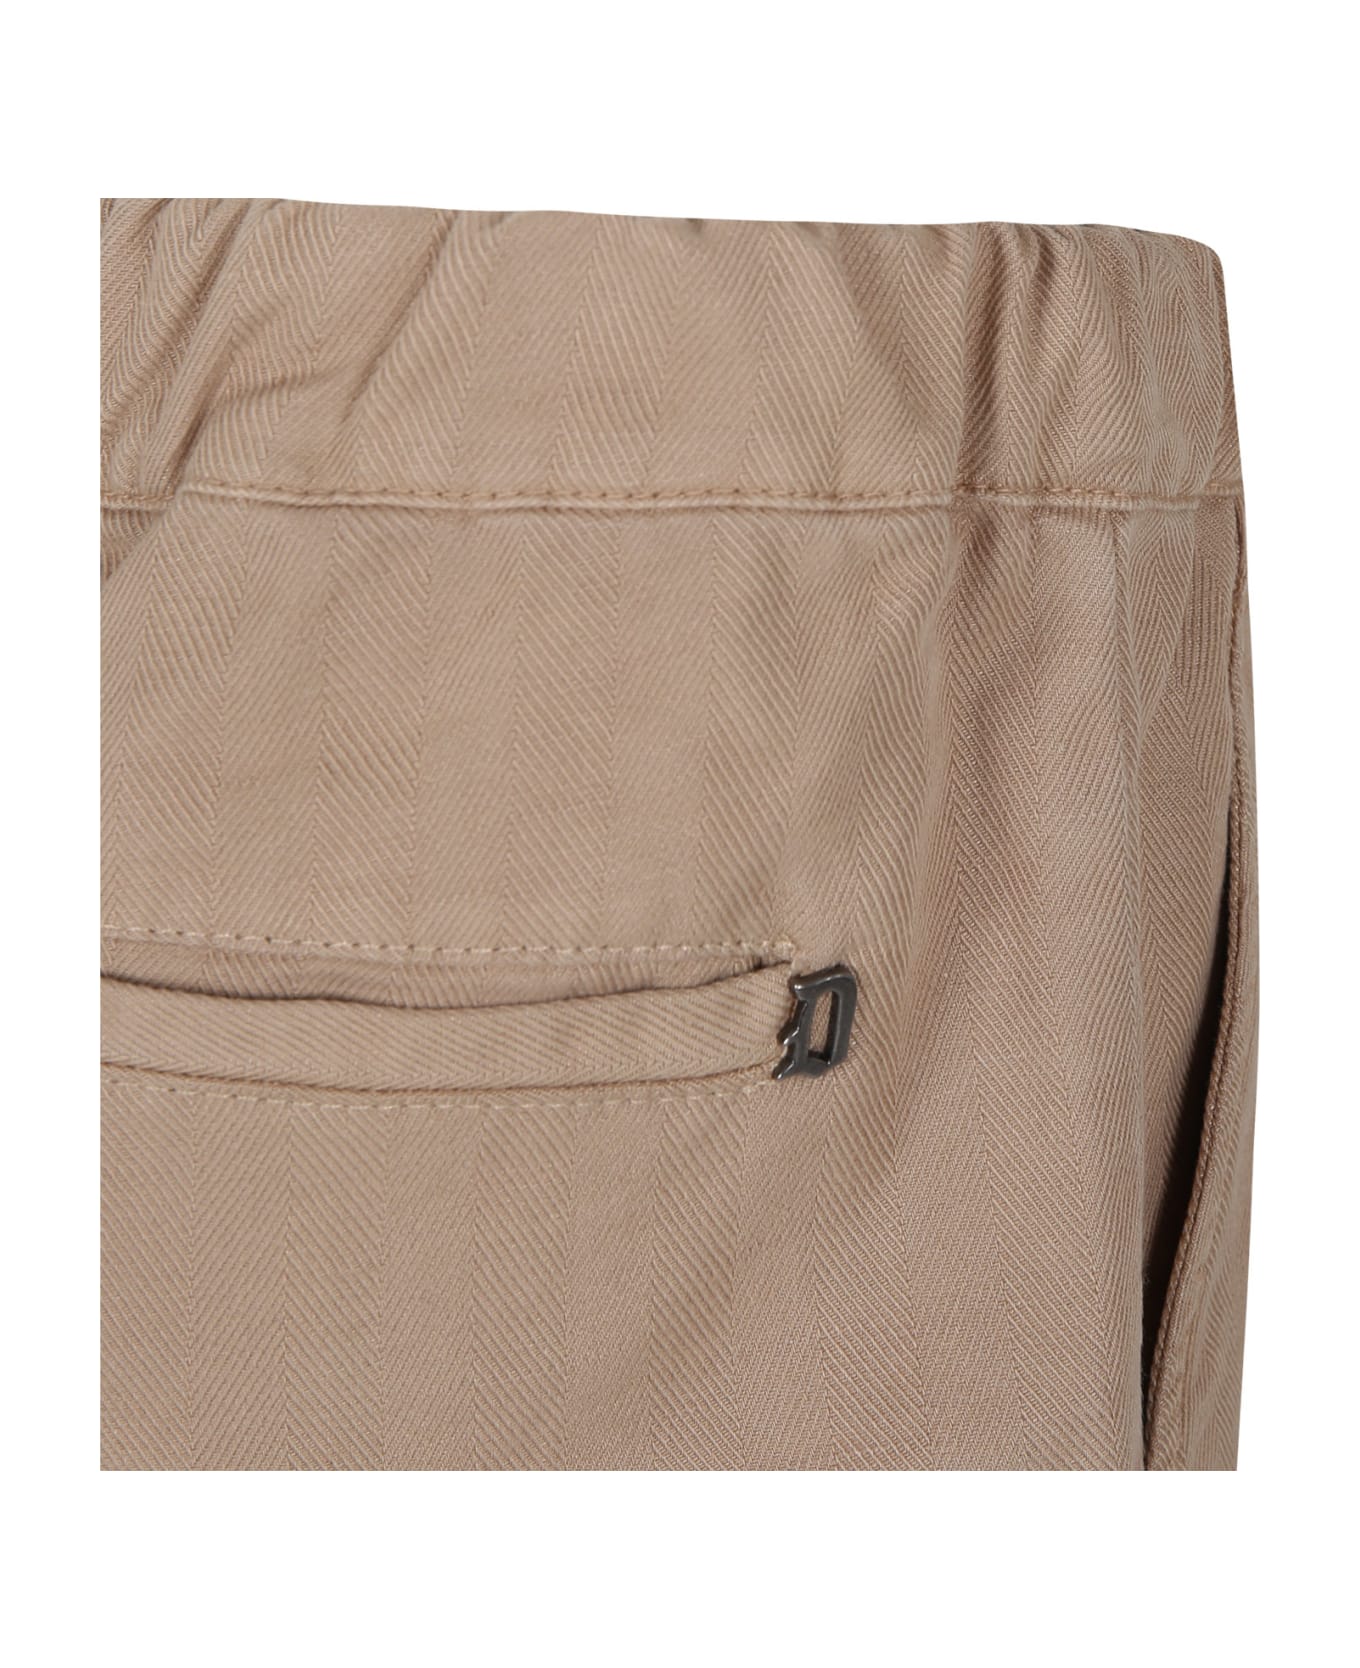 Dondup Beige Shorts For Boy With Logo - Brown ボトムス